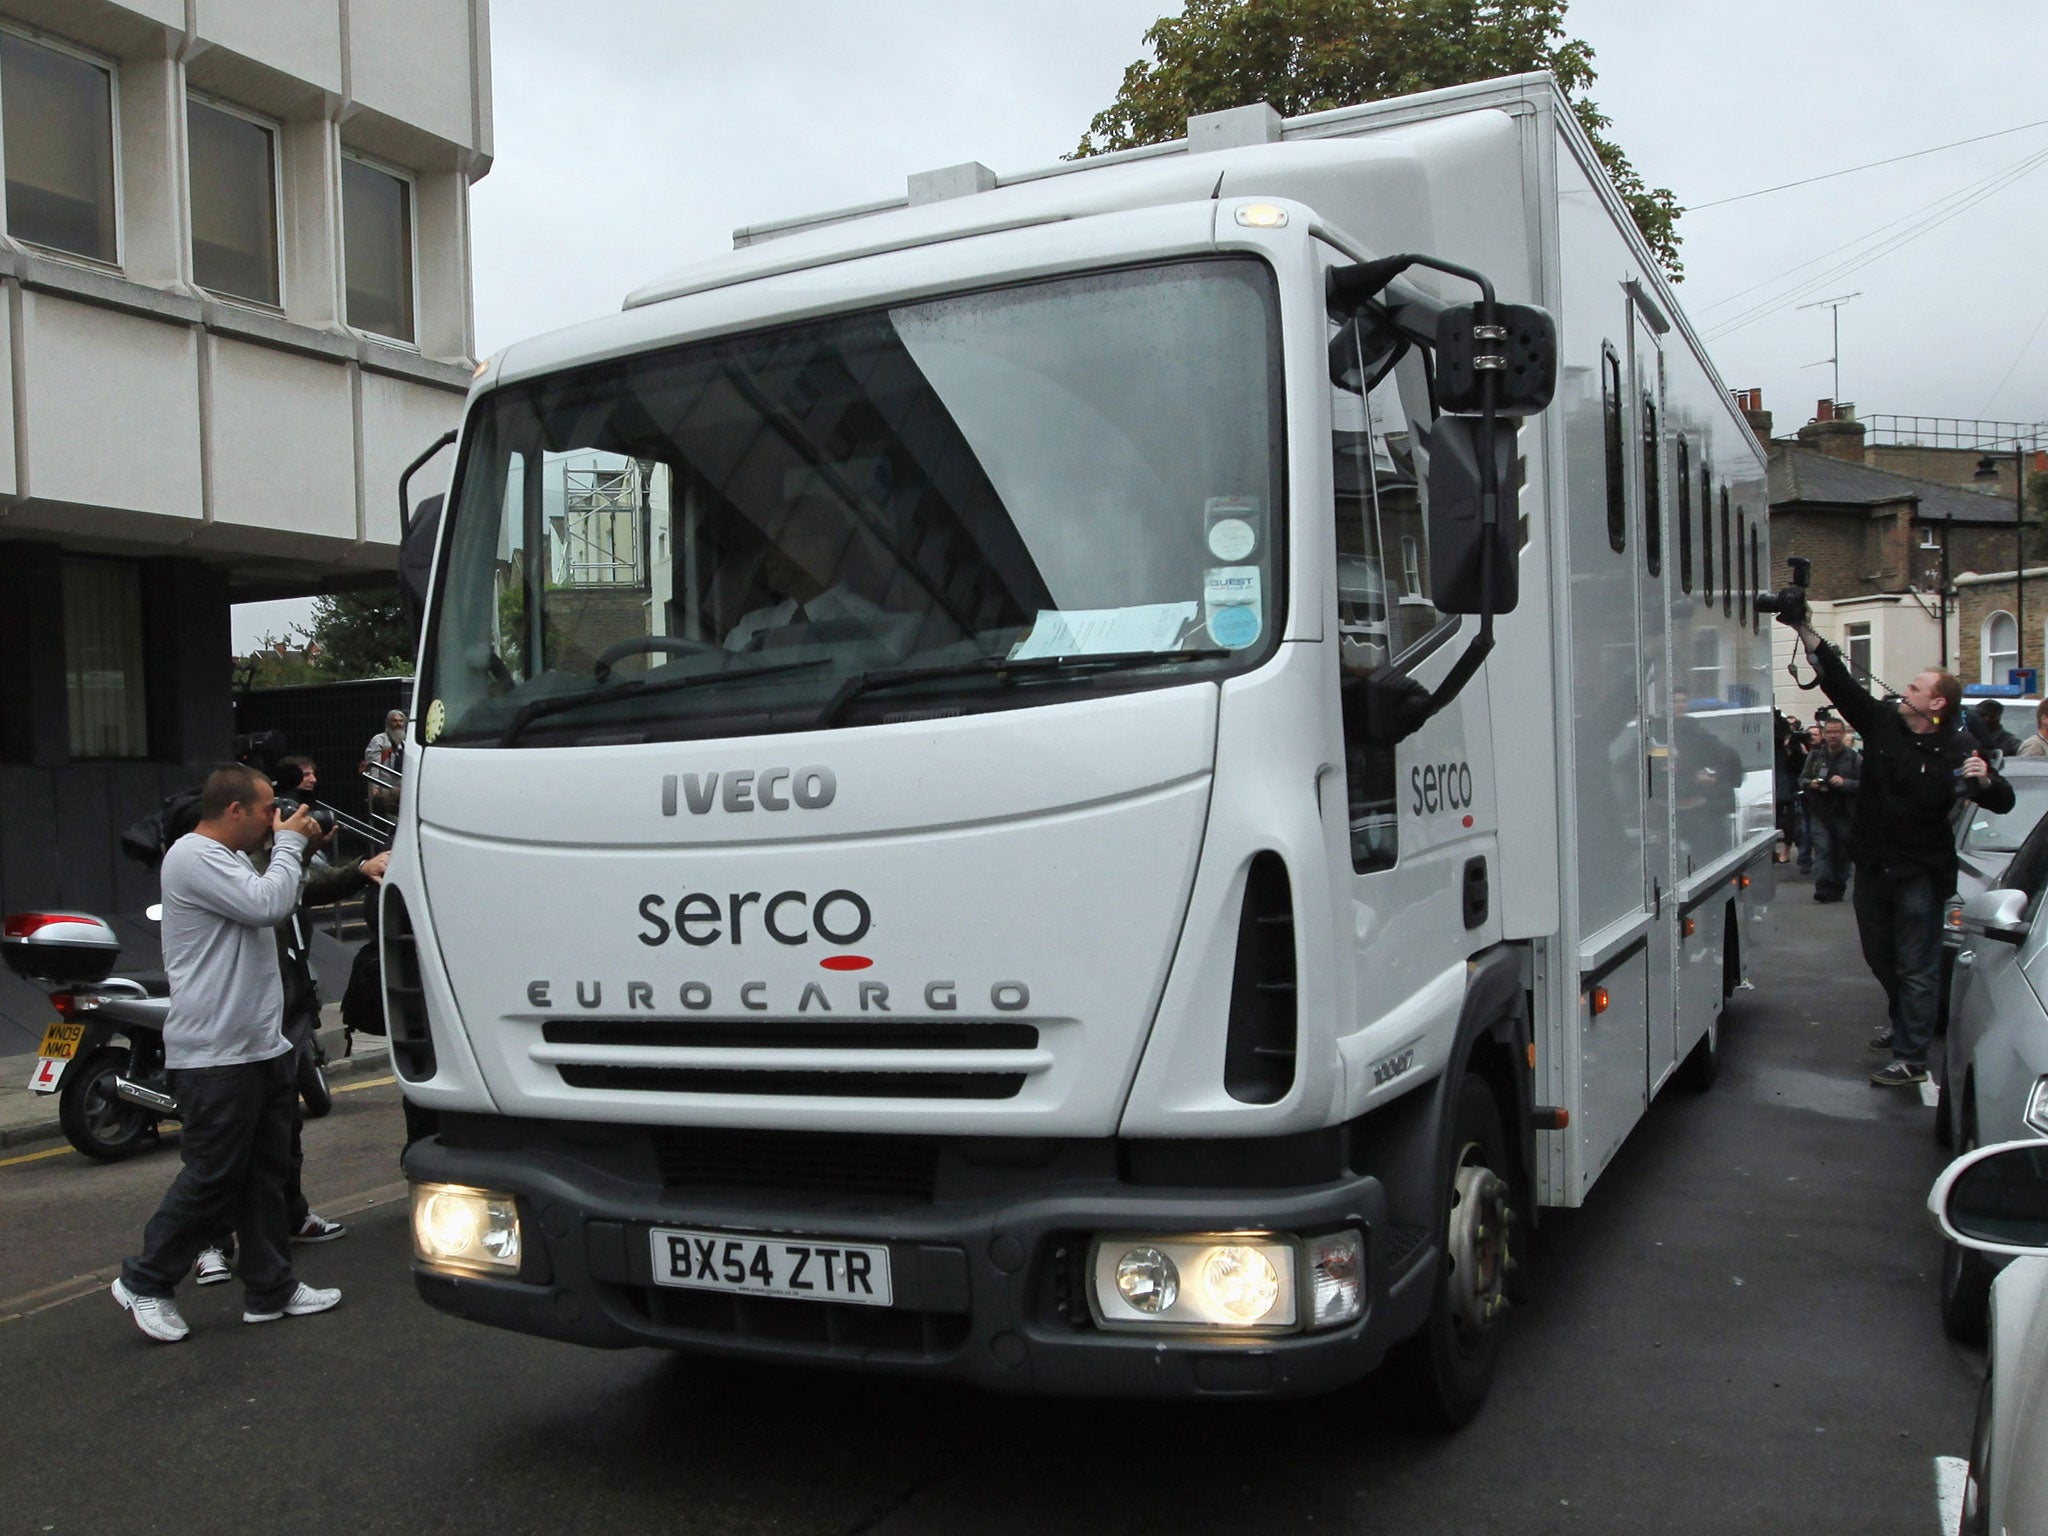 Serco has attracted criticism for its role in the tagging scandal